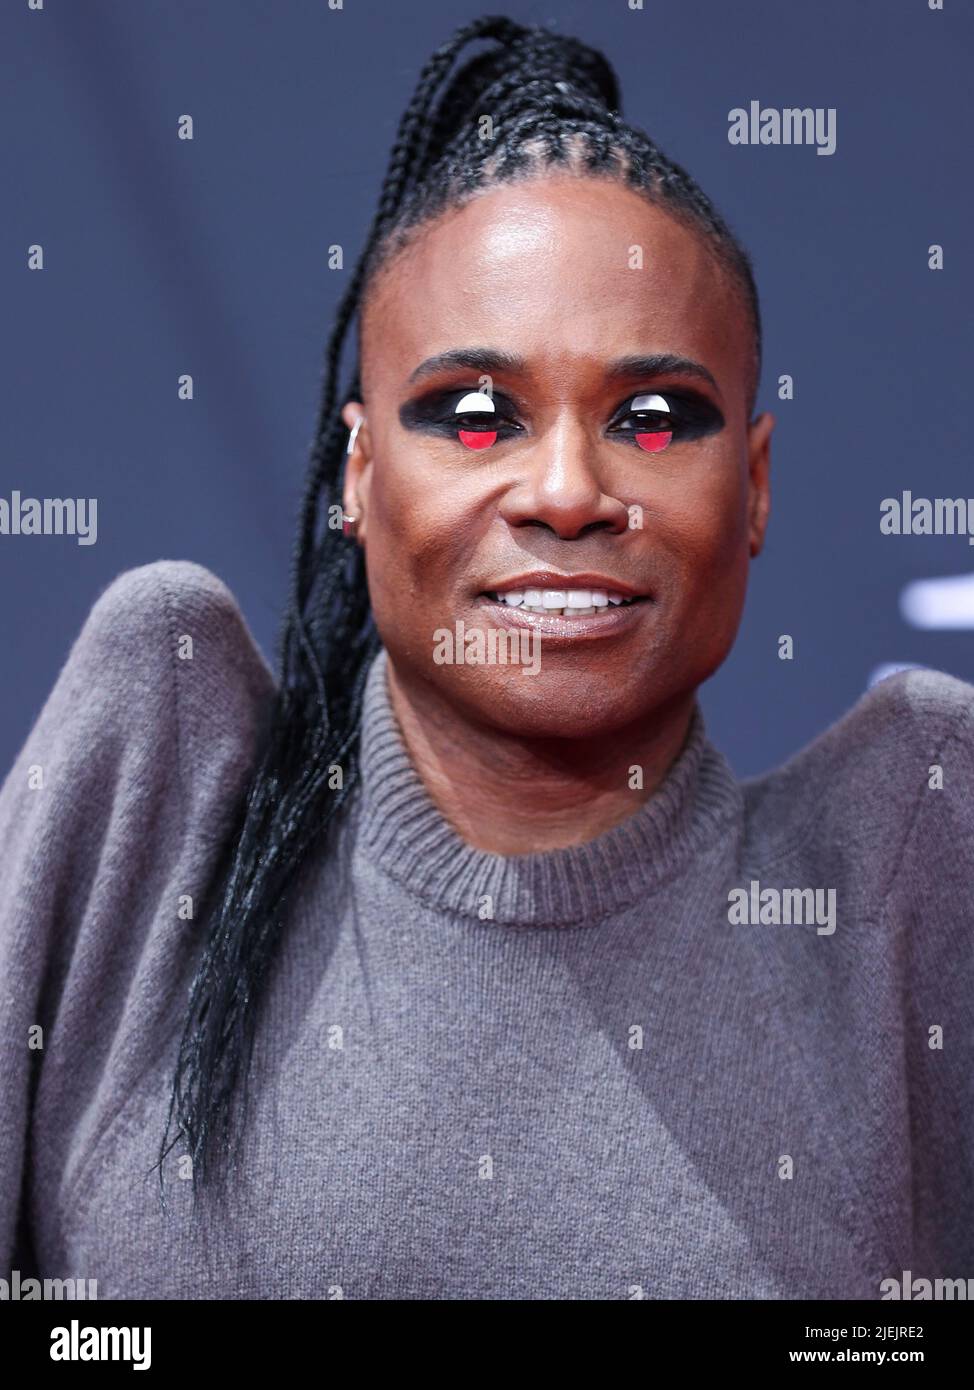 LOS ANGELES, CALIFORNIA, USA - JUNE 26: American actor Billy Porter wearing Rick Owens arrives at the BET Awards 2022 held at Microsoft Theater at L.A. Live on June 26, 2022 in Los Angeles, California, United States. (Photo by Xavier Collin/Image Press Agency) Credit: Image Press Agency/Alamy Live News Stock Photo